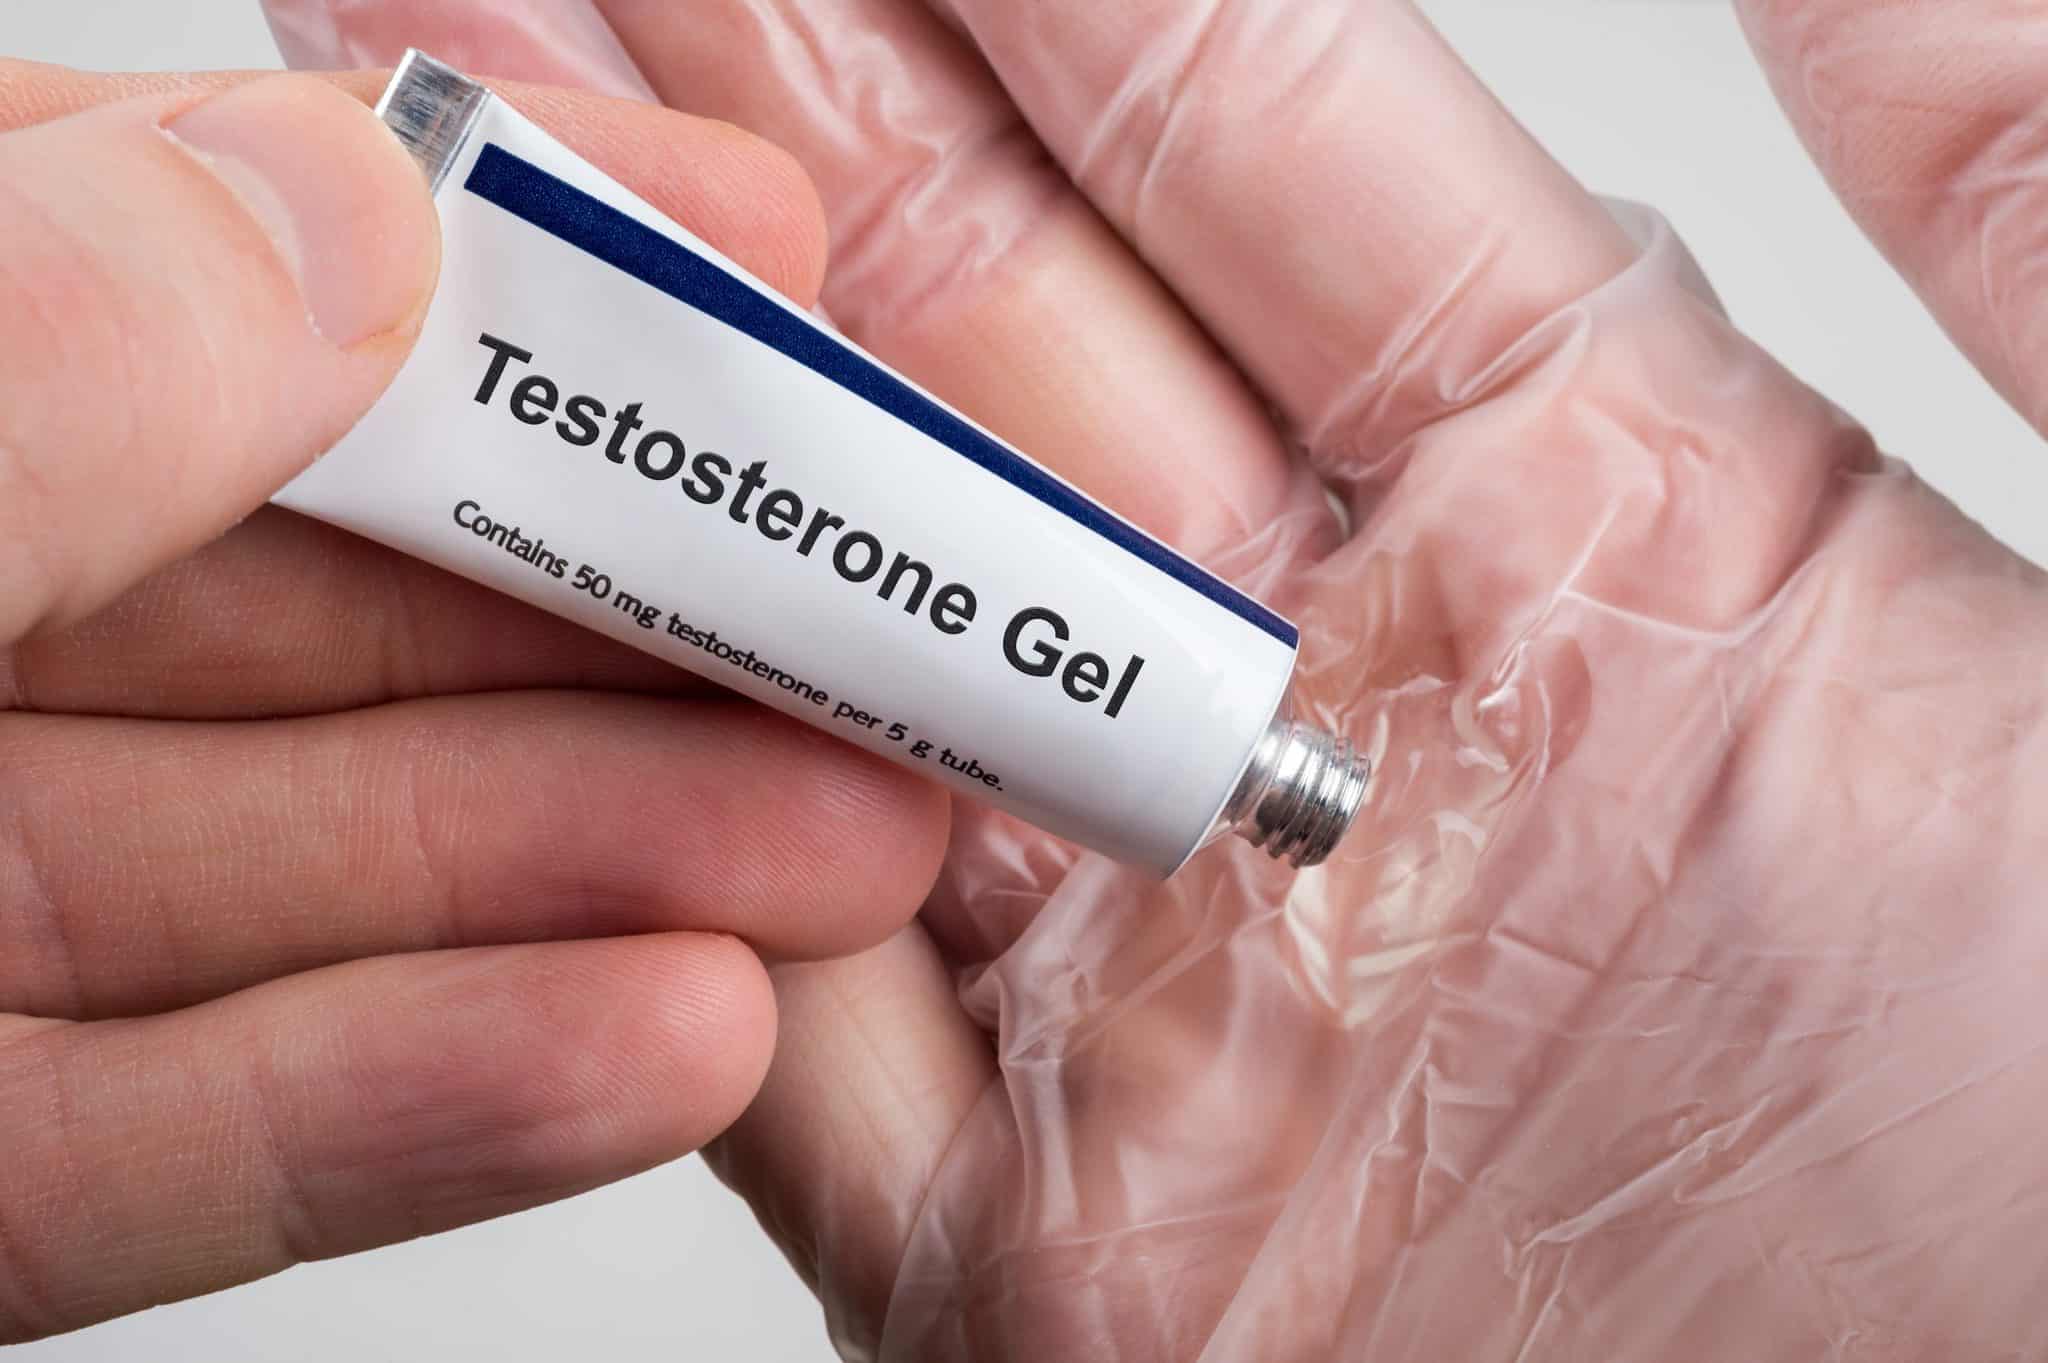 A mini container of testosterone gel being squeezed into a hand with a plastic glove on it. Testosterone Replacement Therapy (TRT) using testosterone gel.